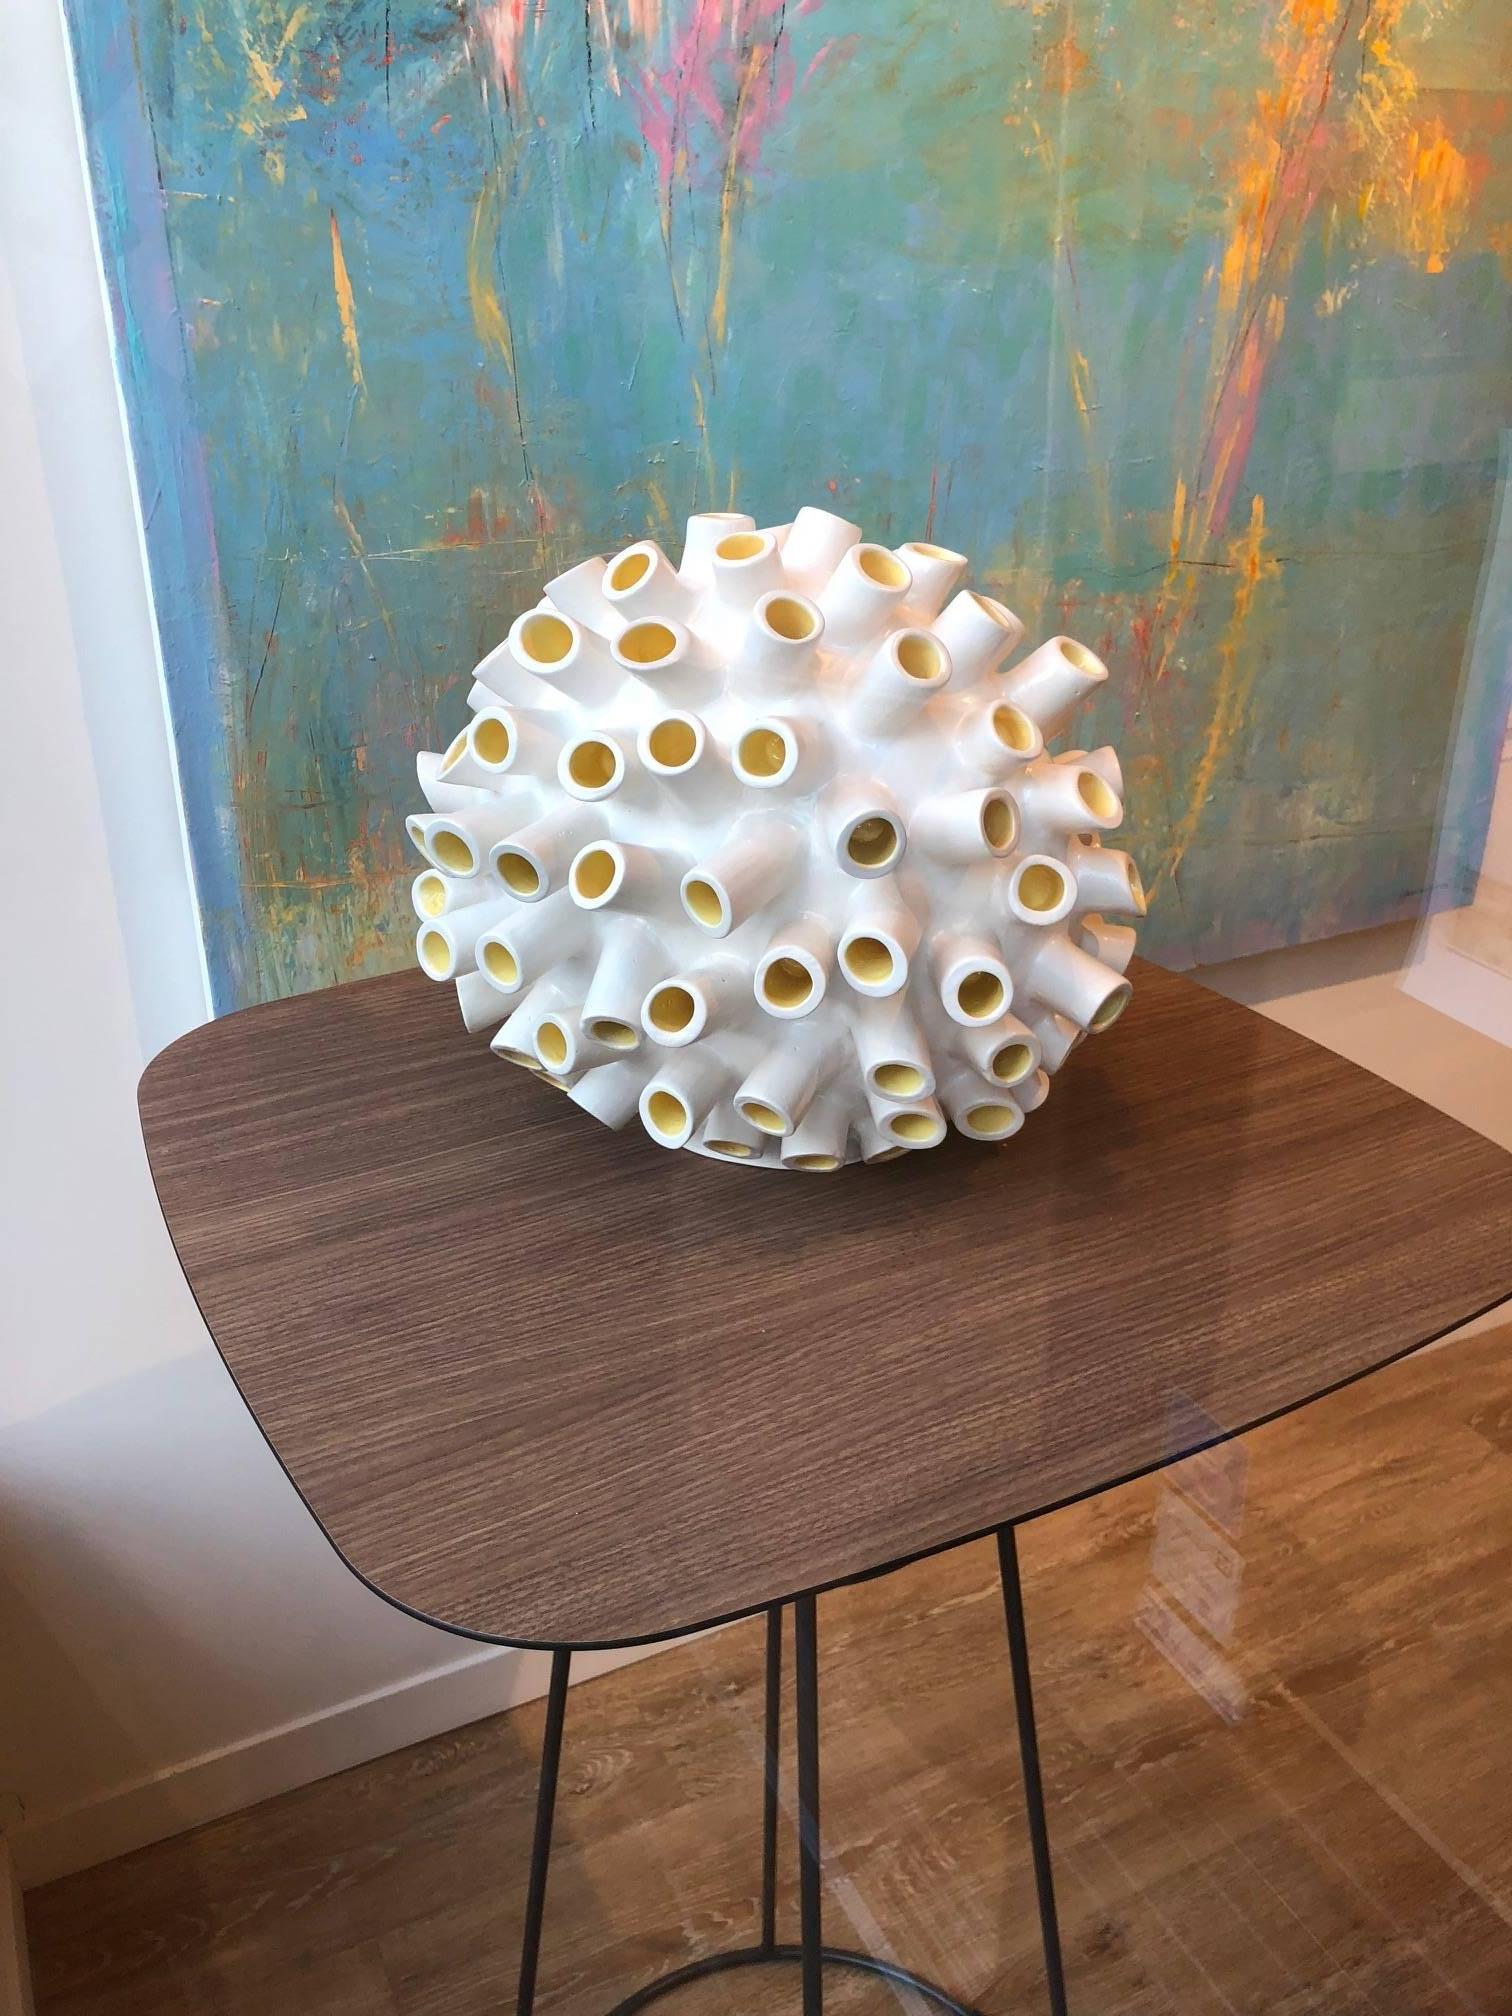 Razz-Ma-Tazz No. II / ceramic sculpture in white and yellow - Sculpture by Jane B. Grimm